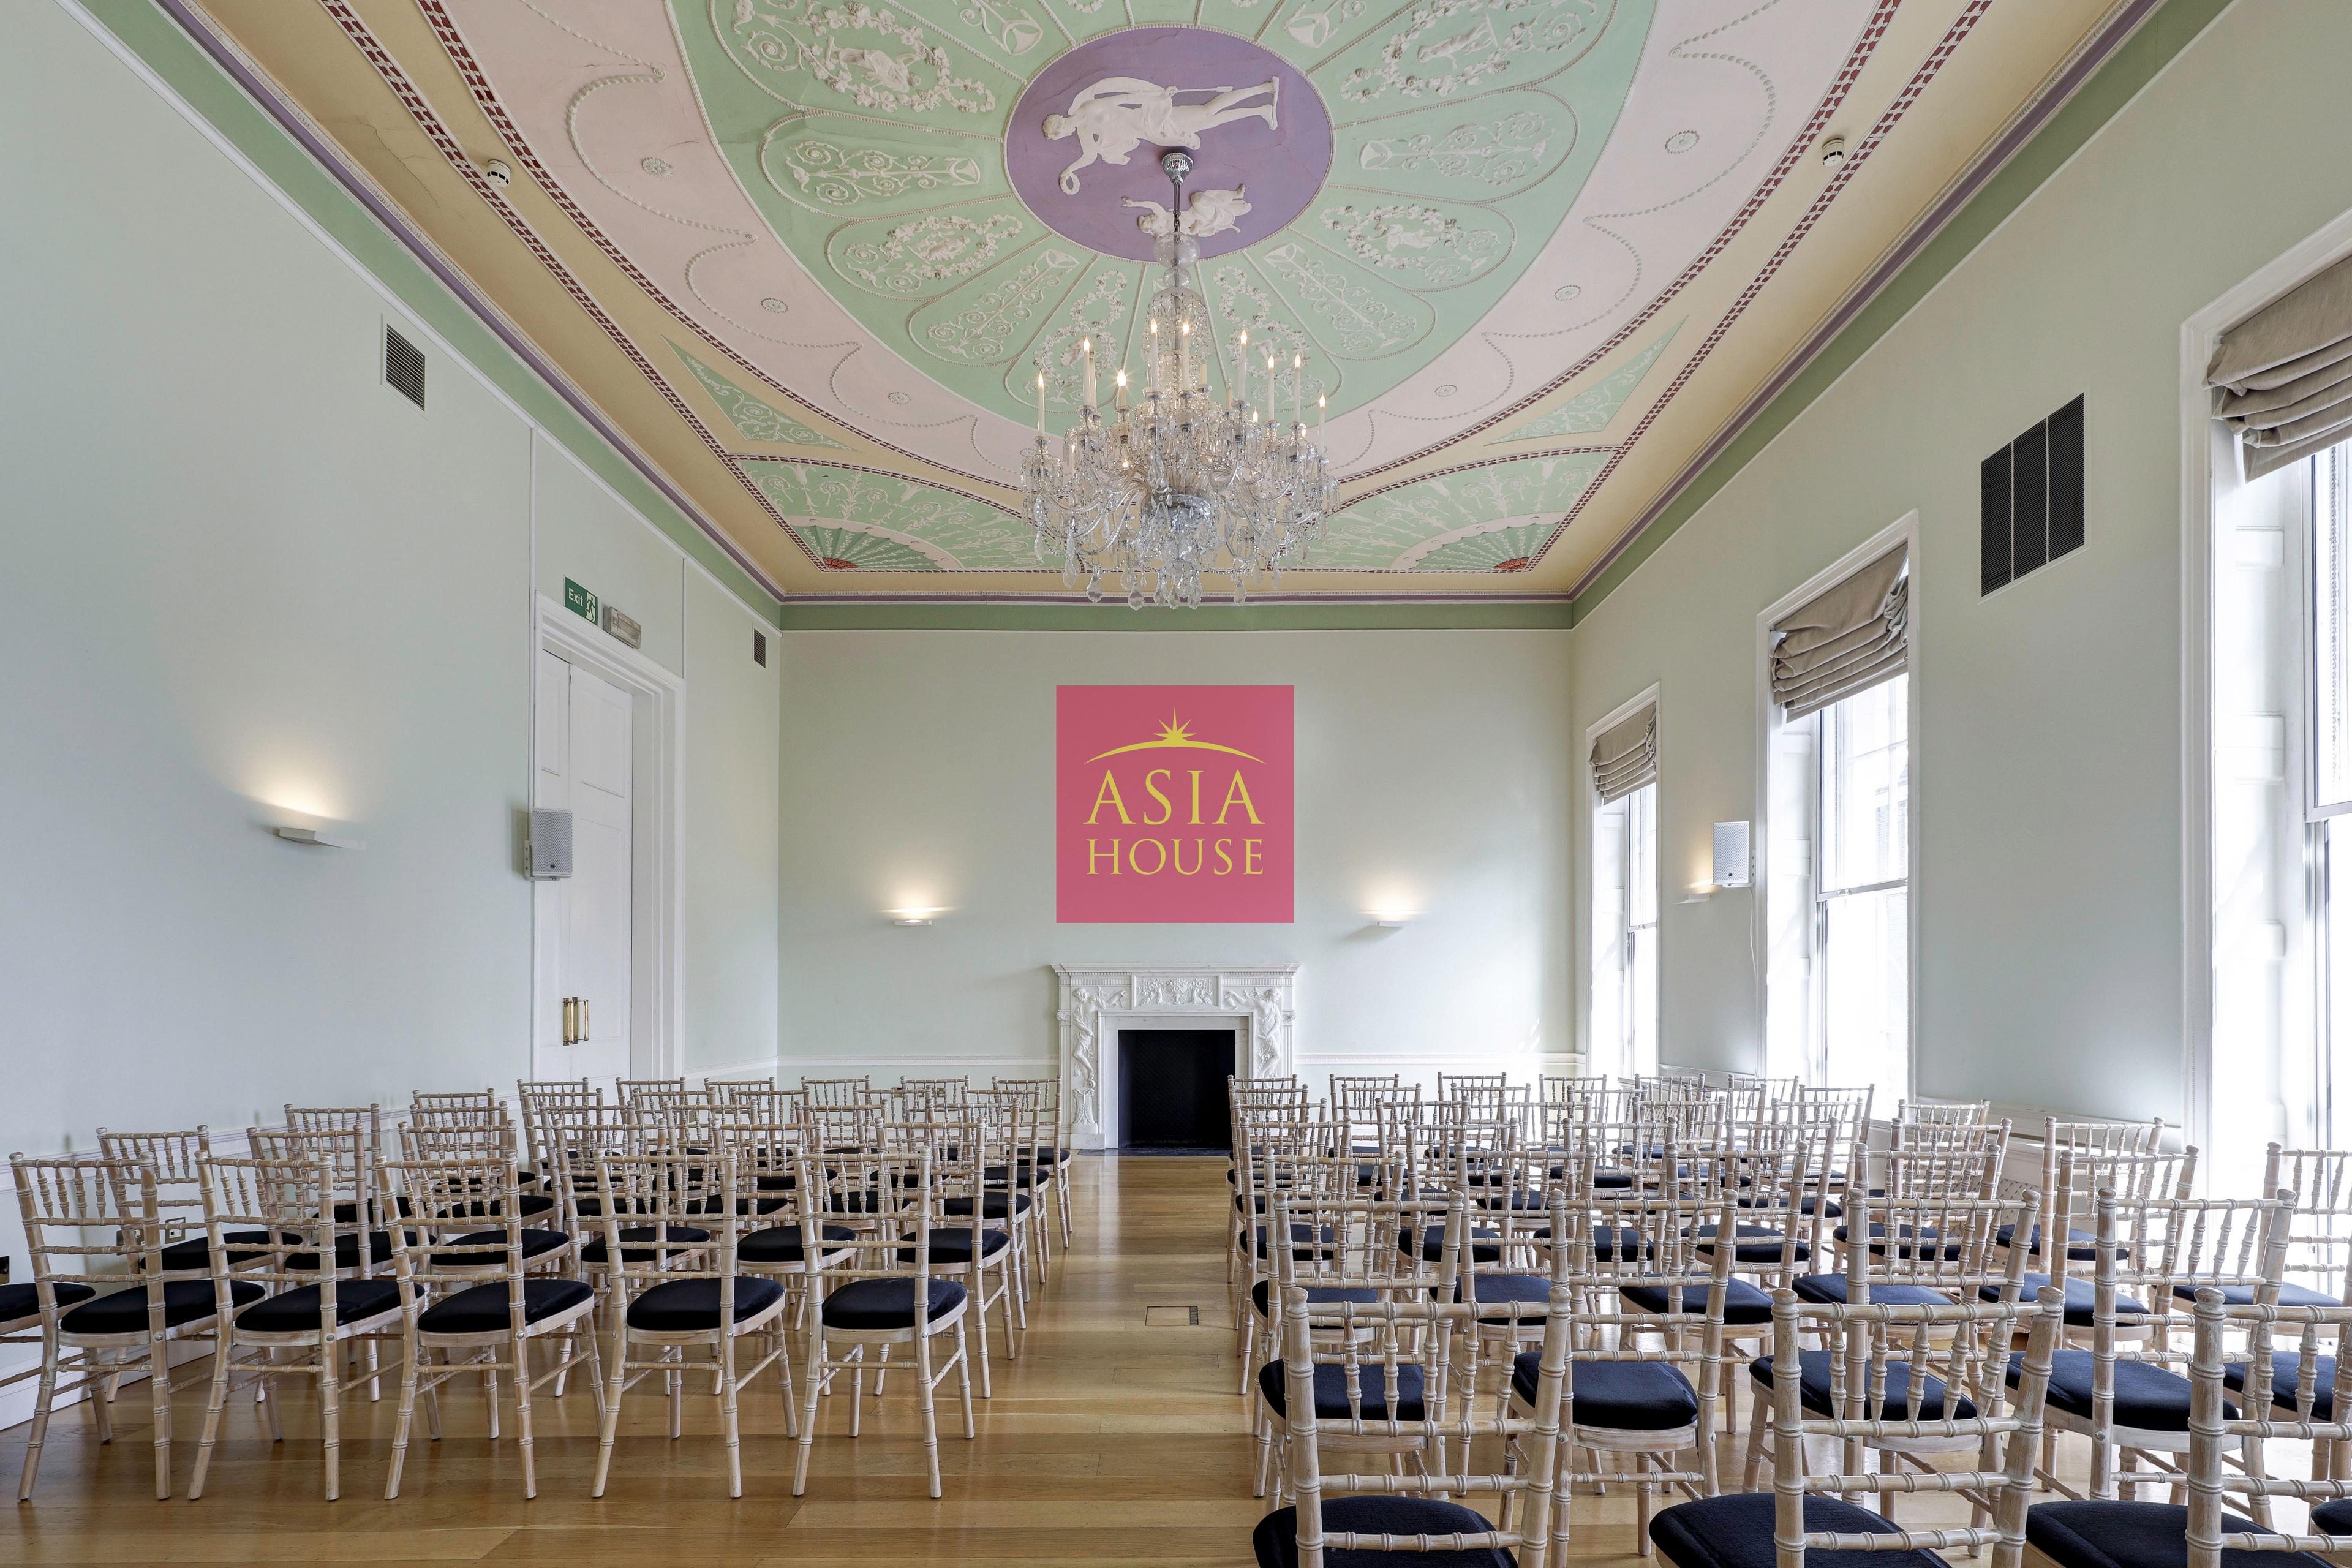 Gallery, Asia House photo #25